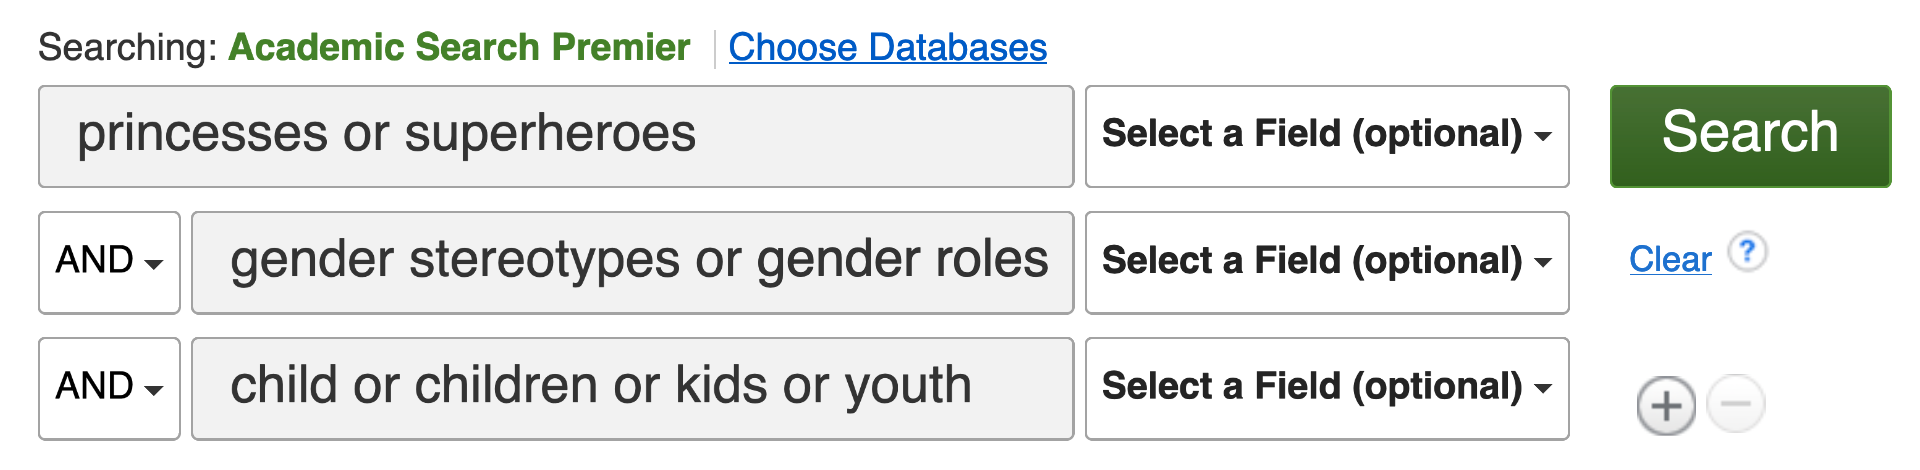 Screenshot of a search strategy in Academic Search Premier. We searched for princesses or superheroes AND gender sterotypes or gender roles AND child or children or kids or youth